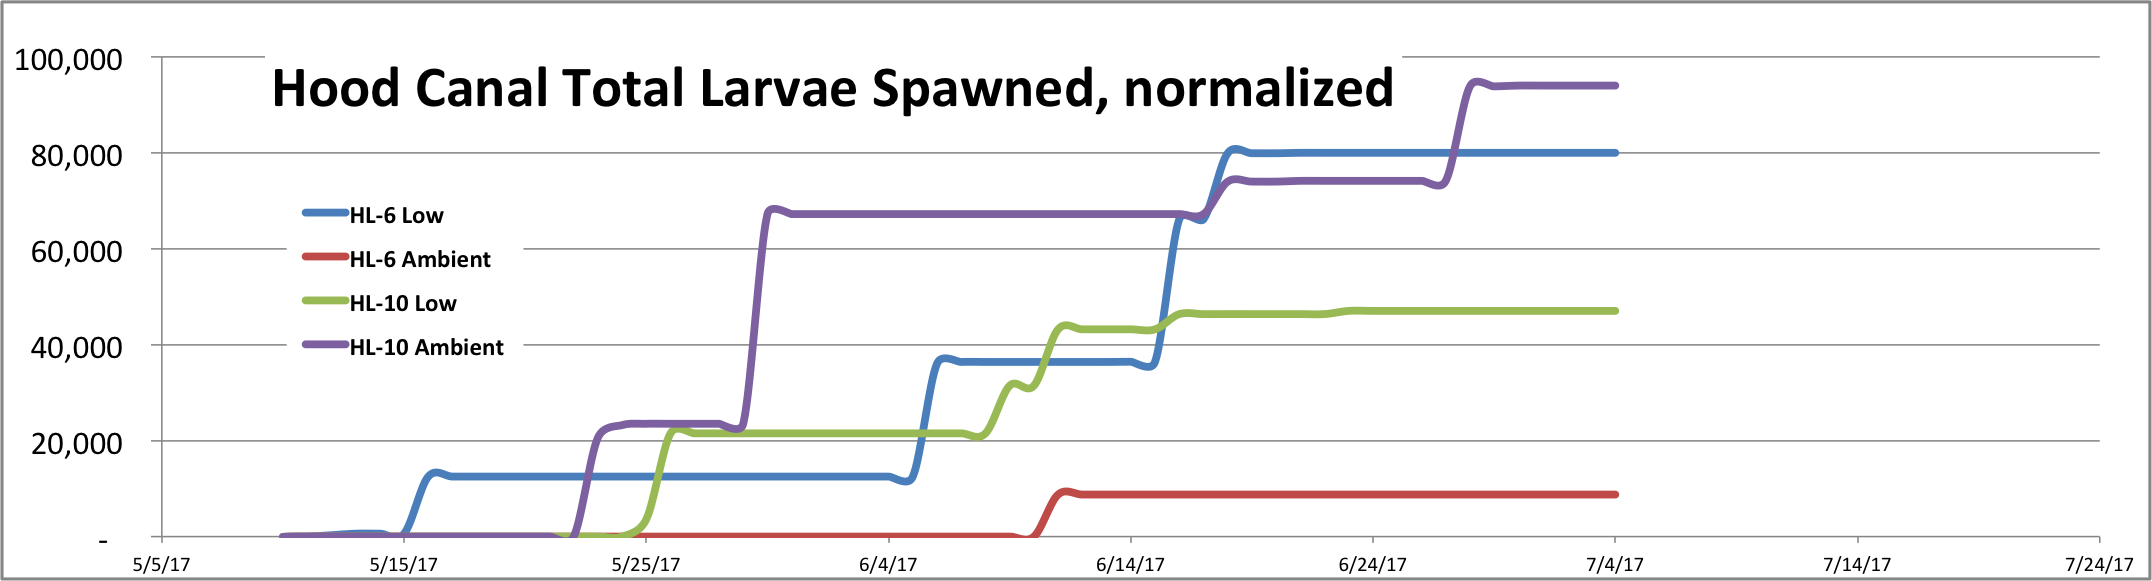 Hood Canal Normalized spawning chart